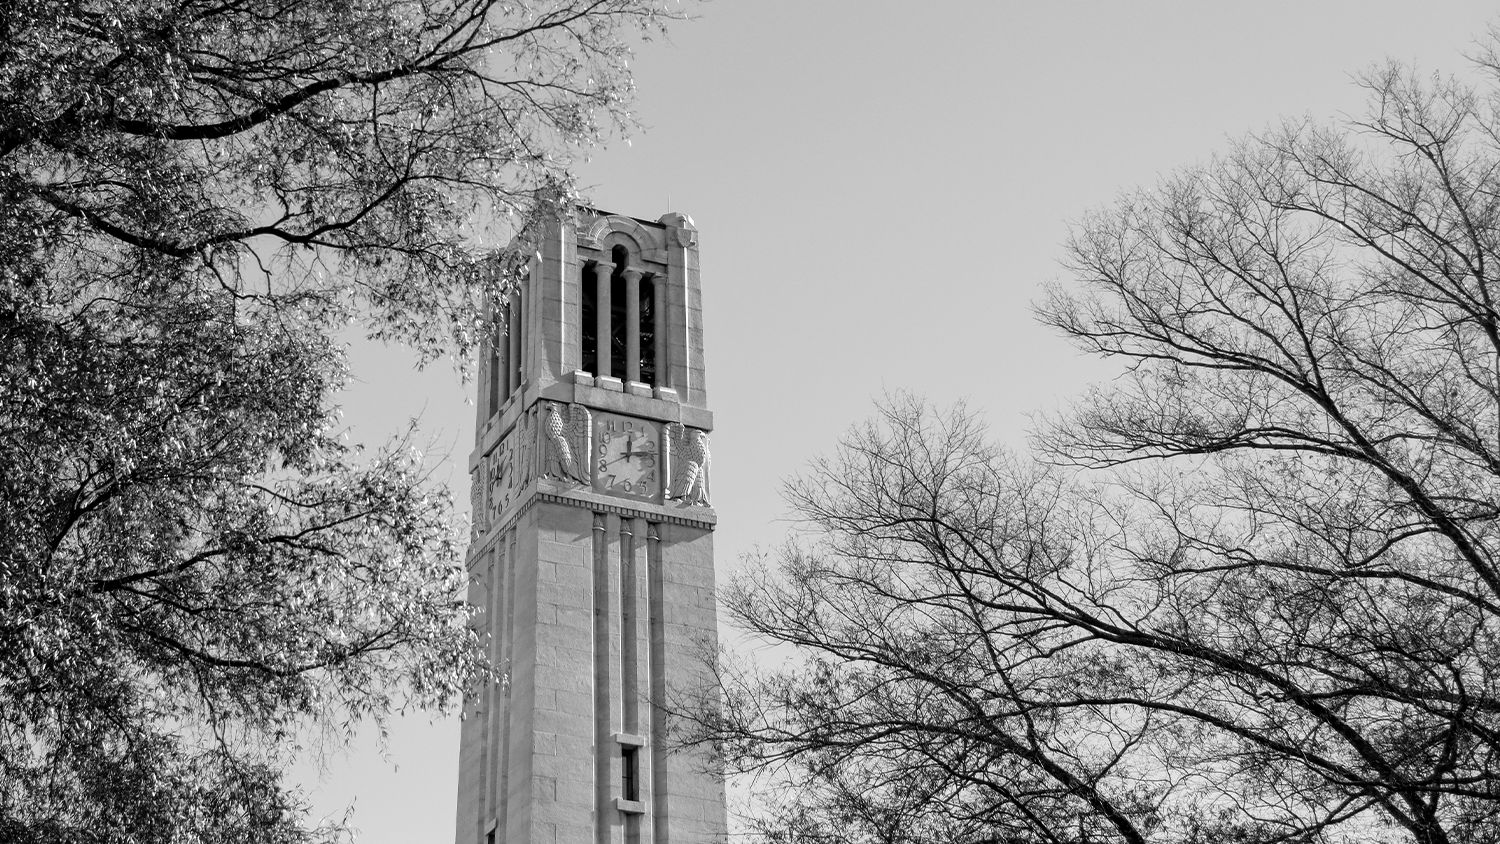 The NC State bell tower in black and white.